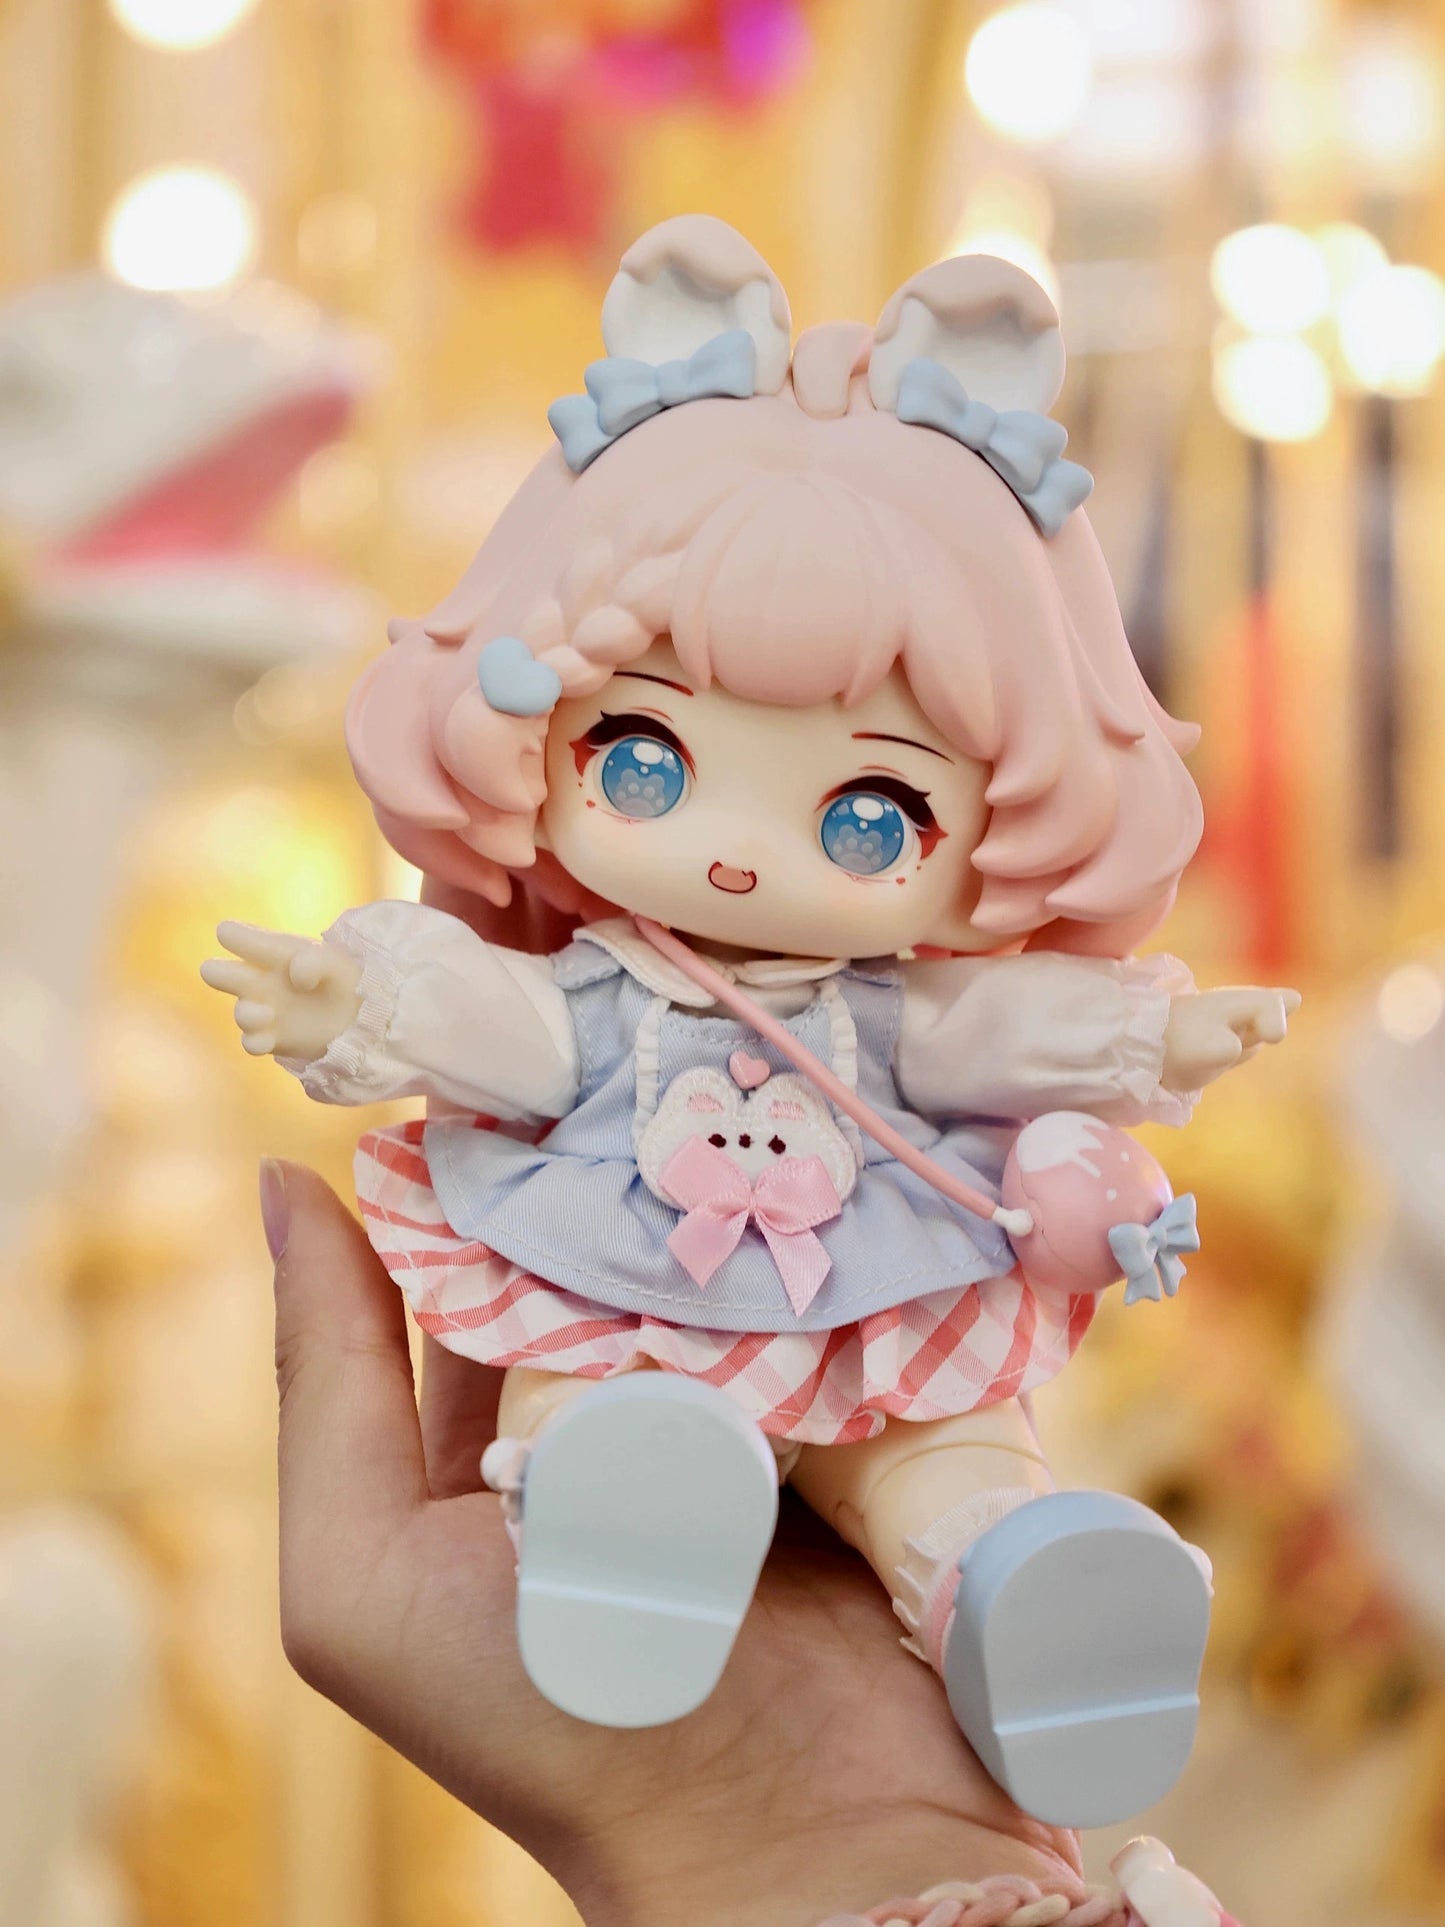 【PREORDER】HANI sweet dream bjd 20cm doll for claim party